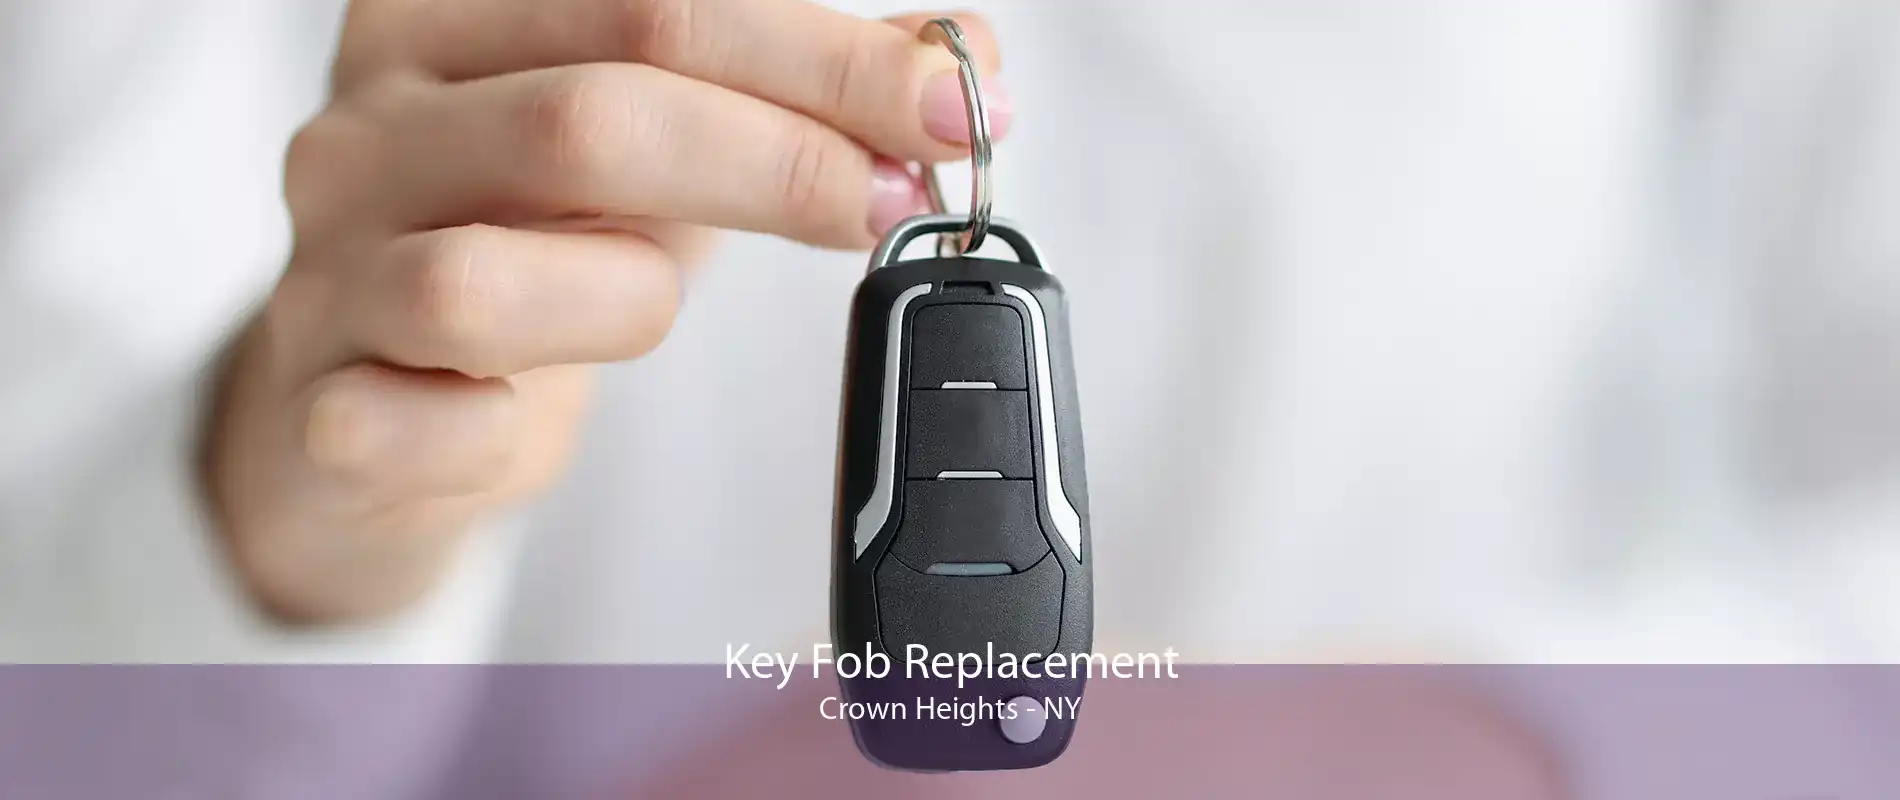 Key Fob Replacement Crown Heights - NY